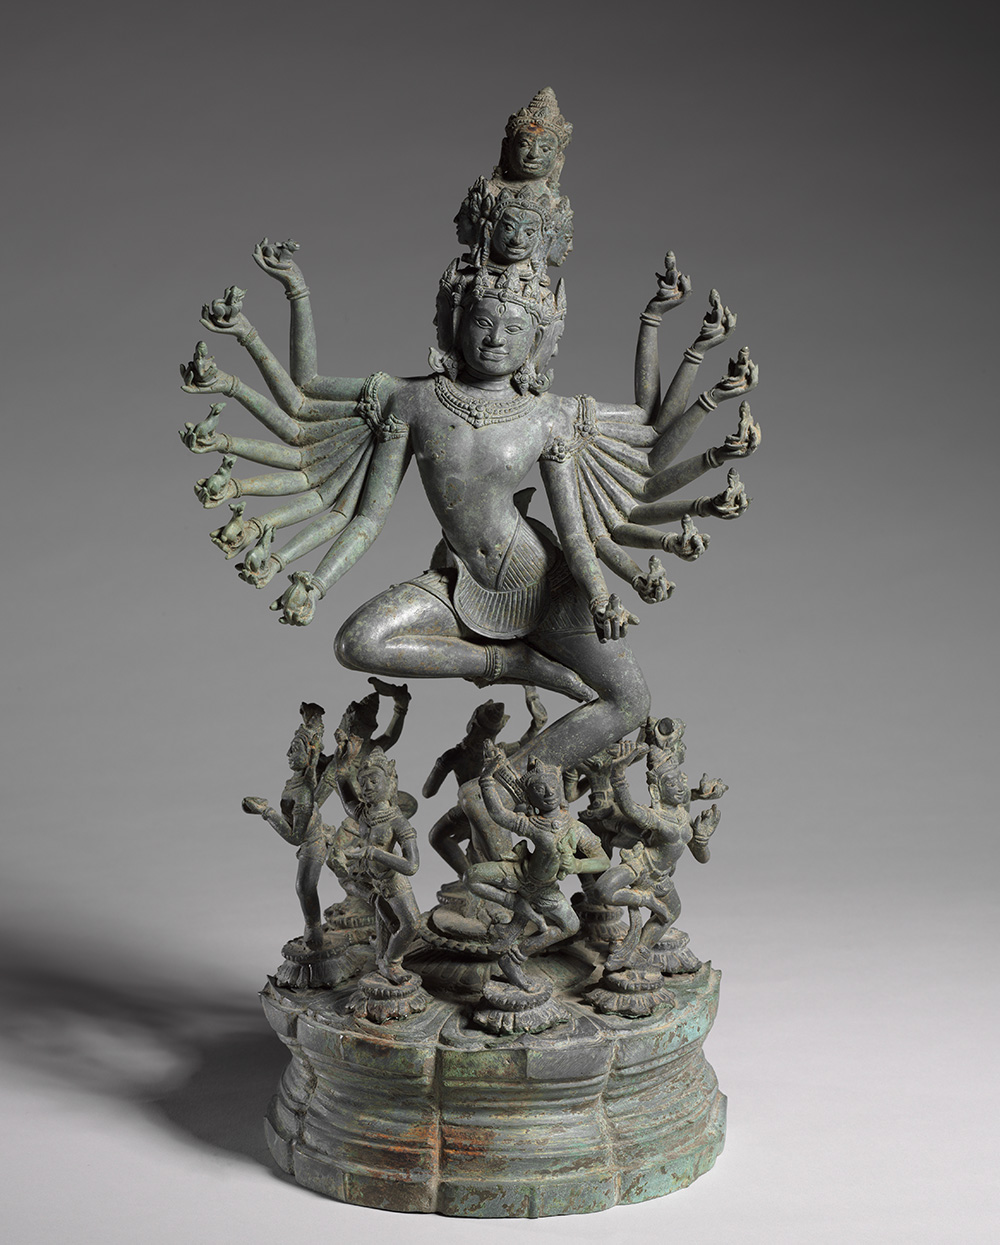 Dancing Hevajra Surrounded by Dancing Yoginis
circa 1050–1100
northeastern Thailand; former kingdom of Angkor
bronze
Cleveland Museum of Art, gift of Maxeen and John Flower in honor of Dr. Stanislaw Czuma, 2011.143
18 1/8 x 9 7/16 in. (46 x 23.9 cm)